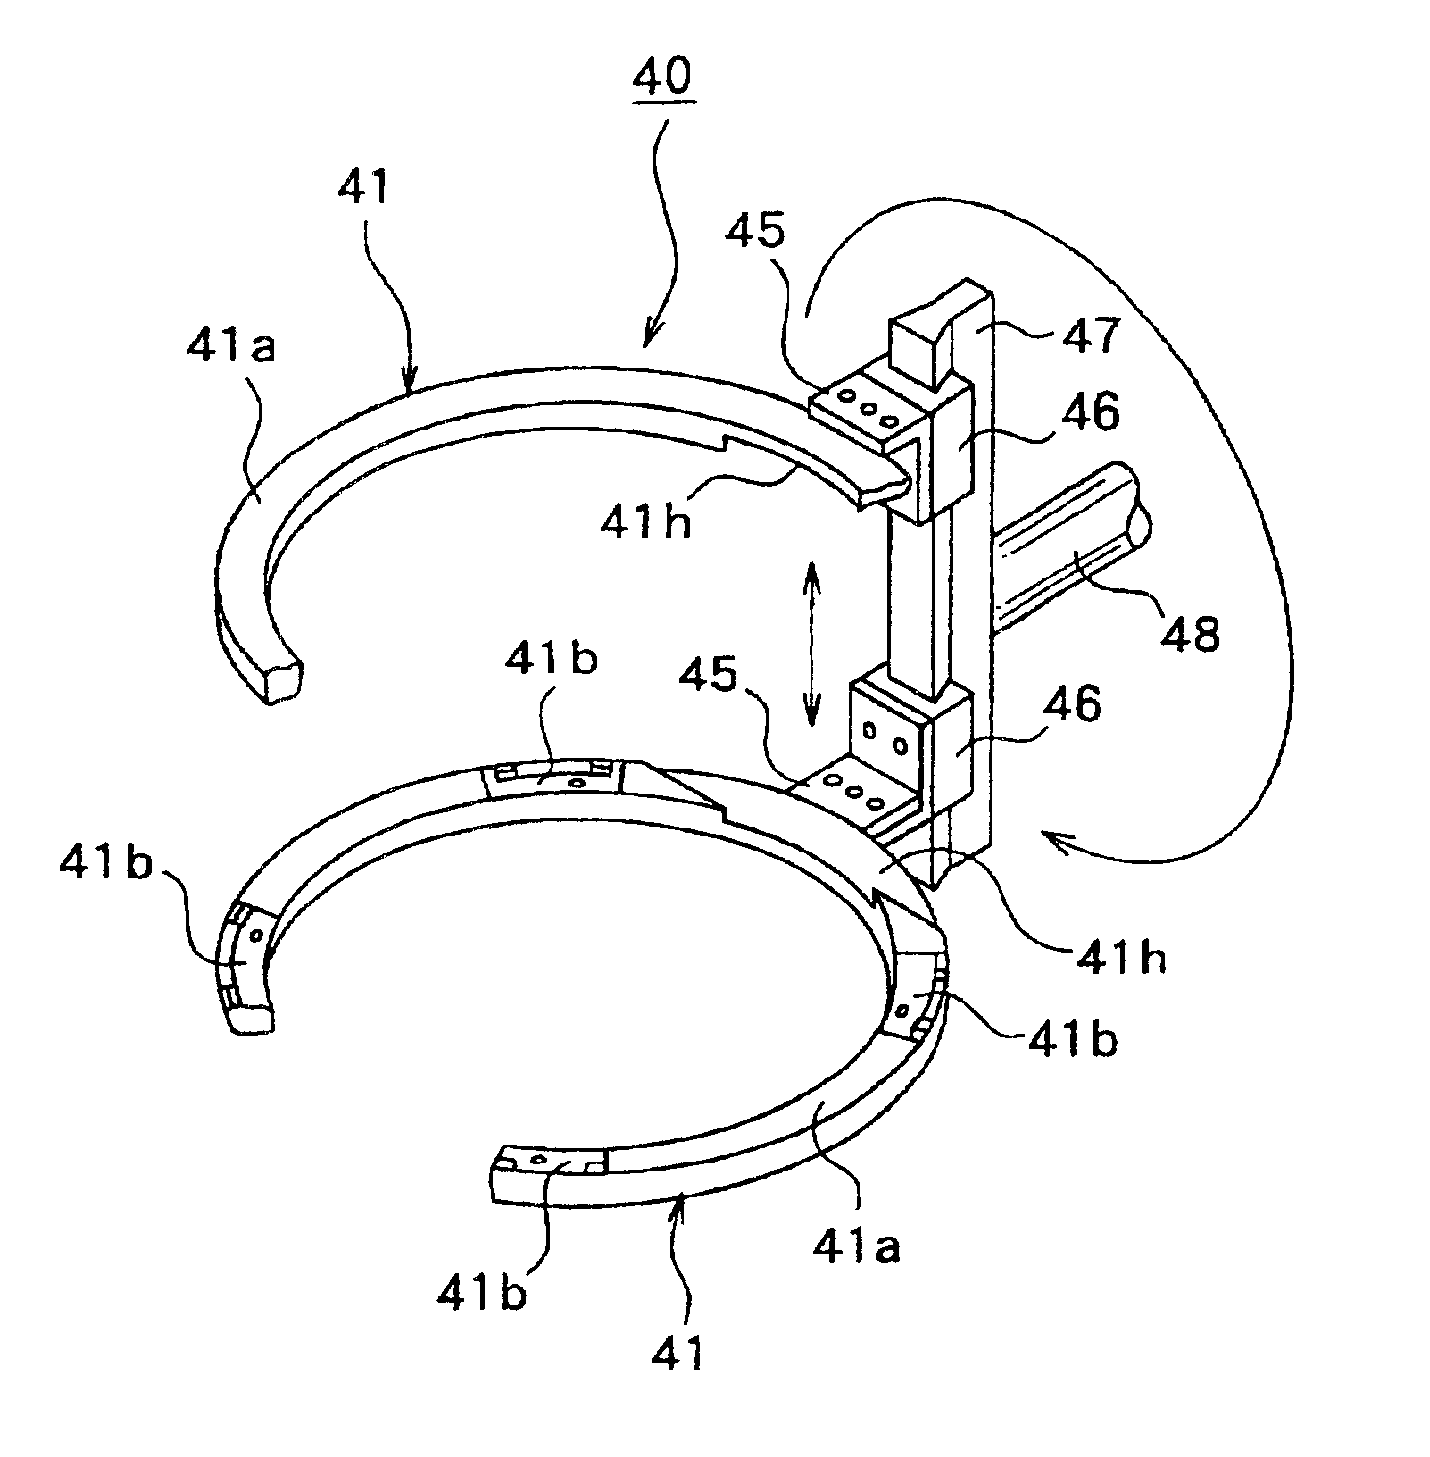 Substrate dual-side processing apparatus